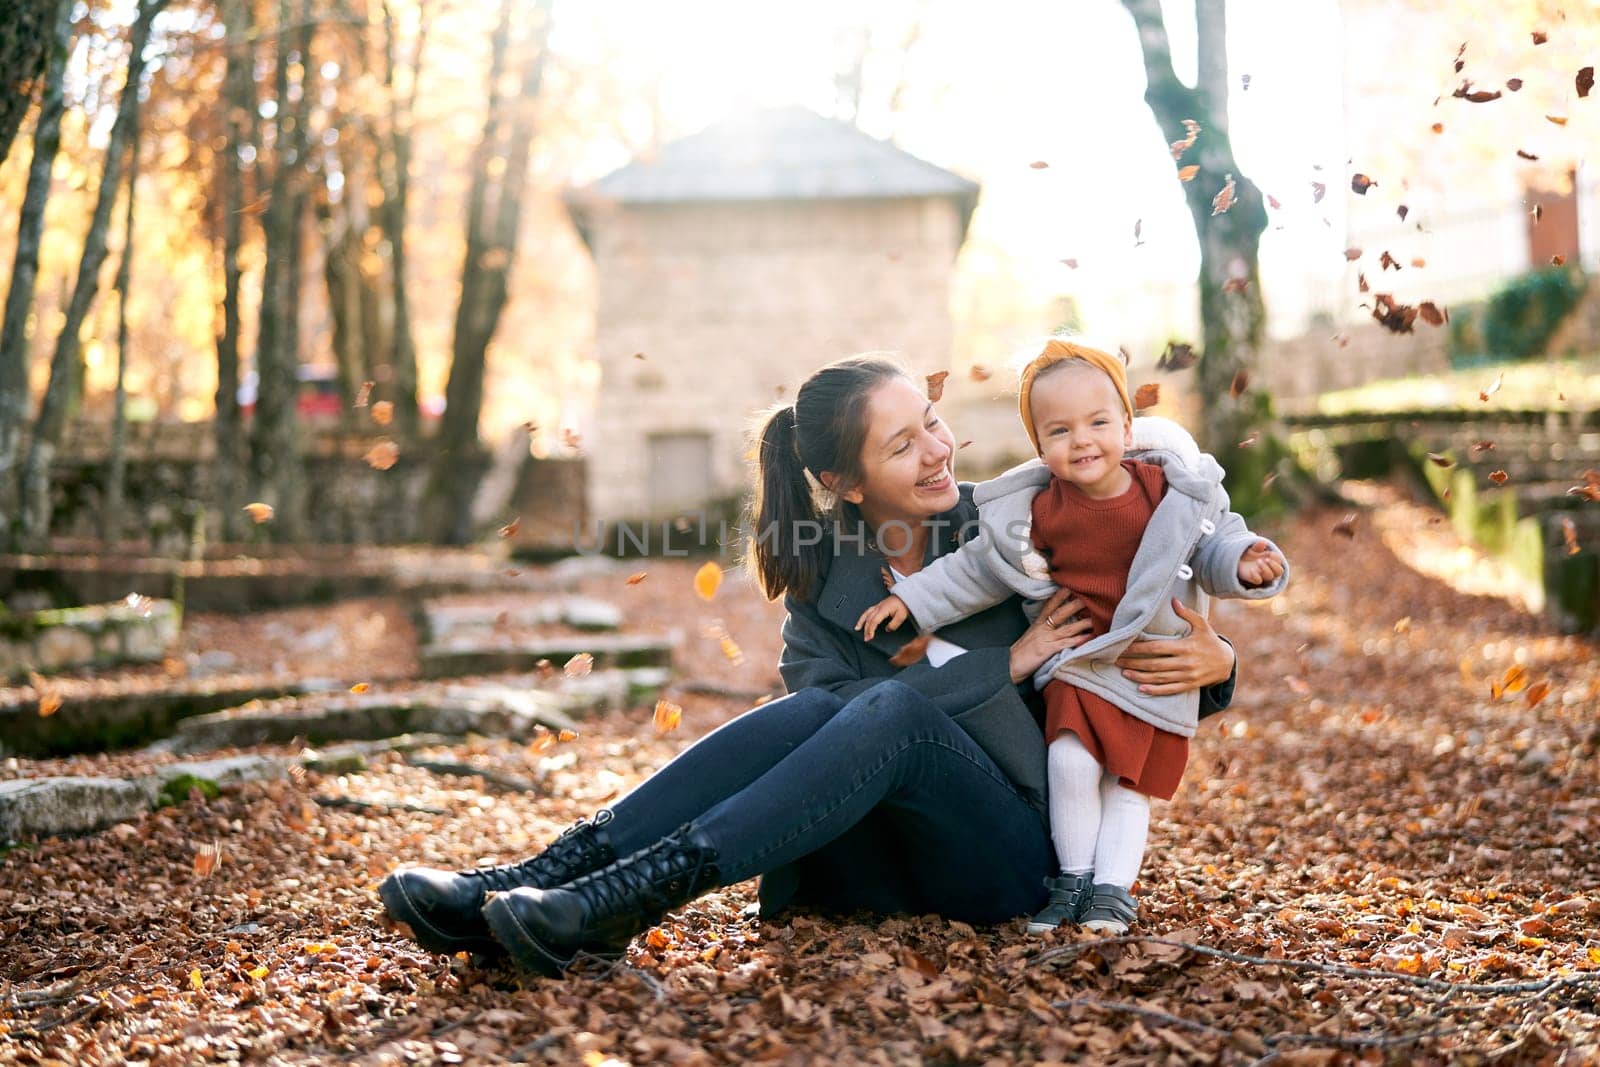 Mom sits on the ground hugging a little girl standing nearby under the falling autumn leaves. High quality photo